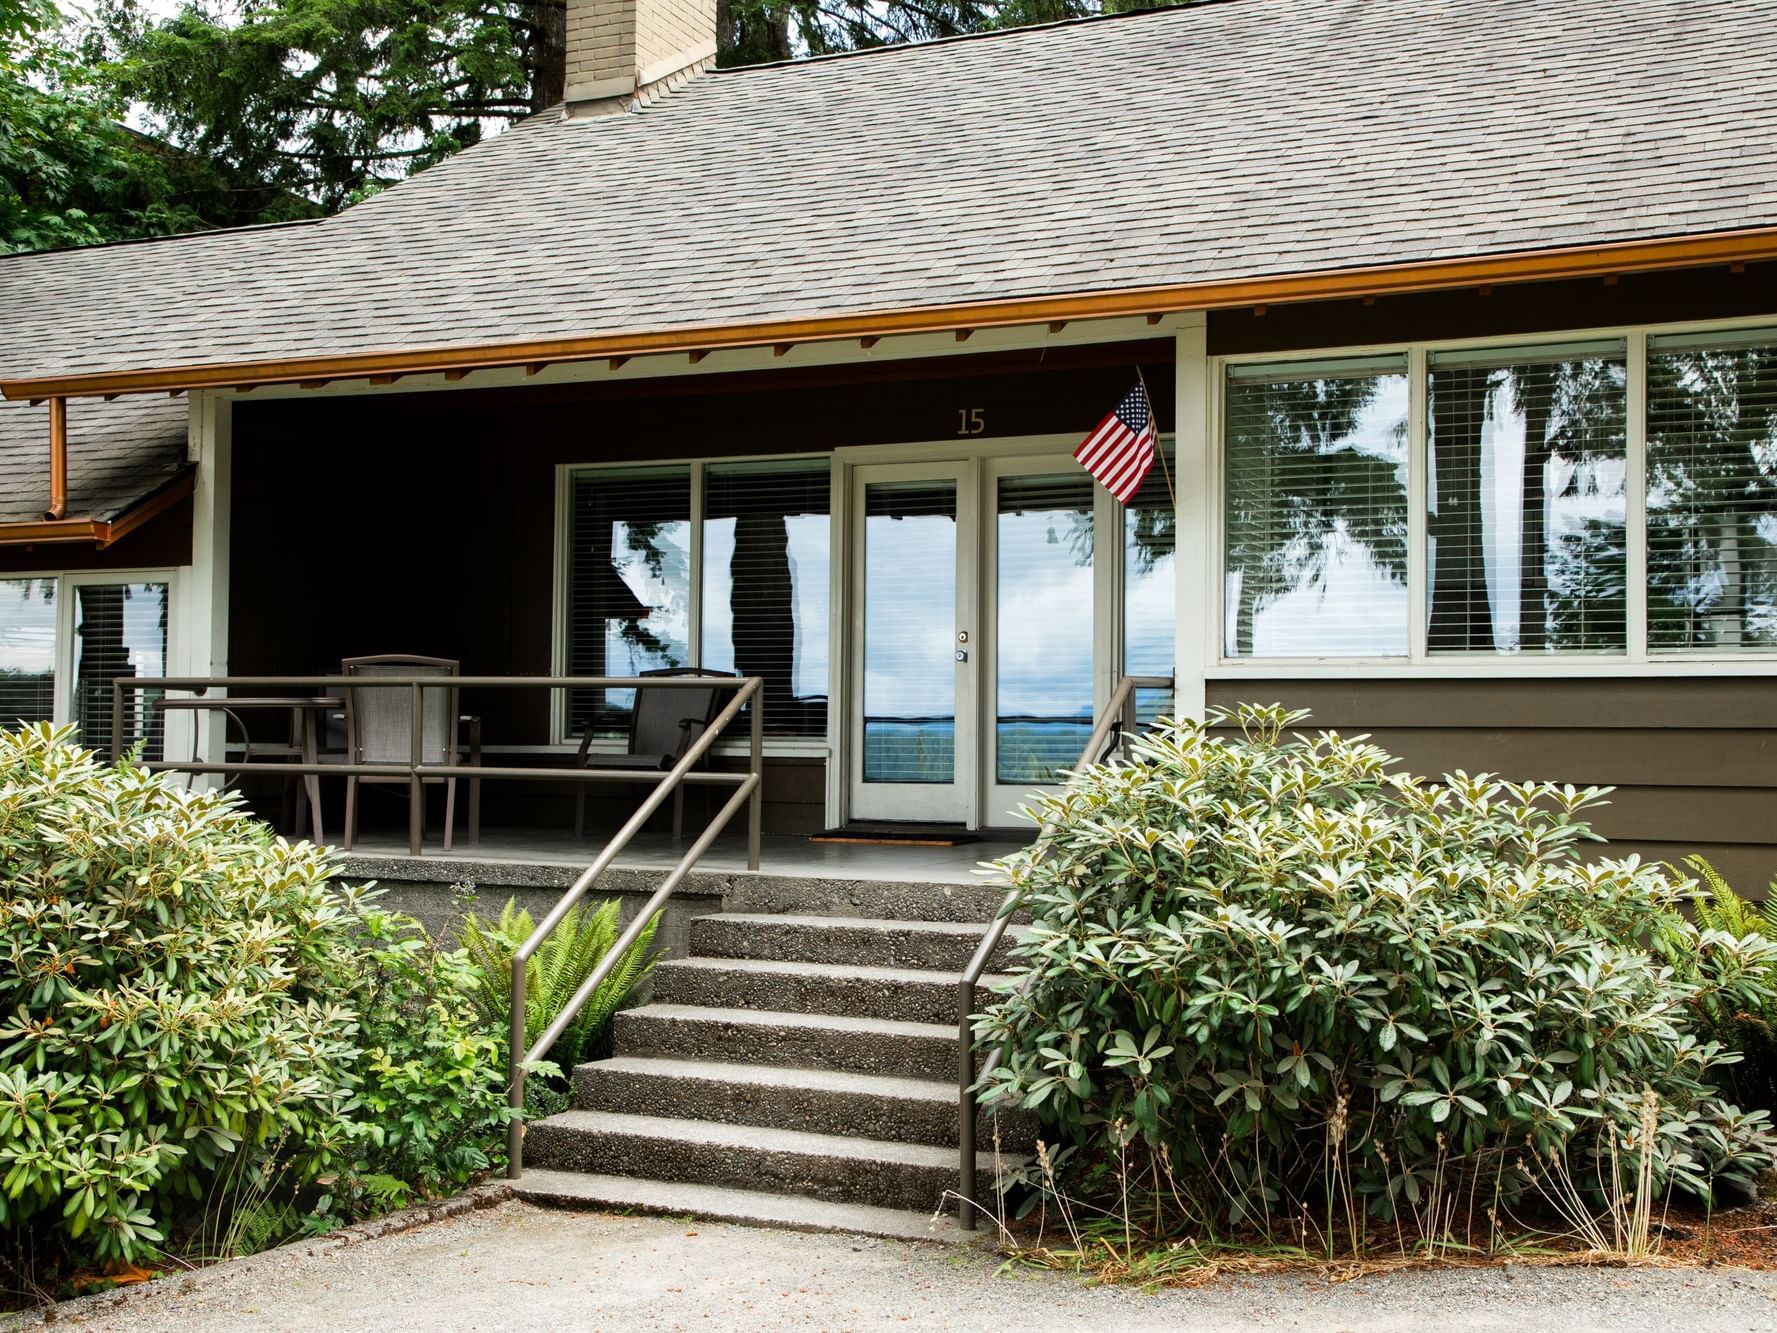 Exterior view of the Two Bedroom Cottage at Alderbrook Resort & Spa